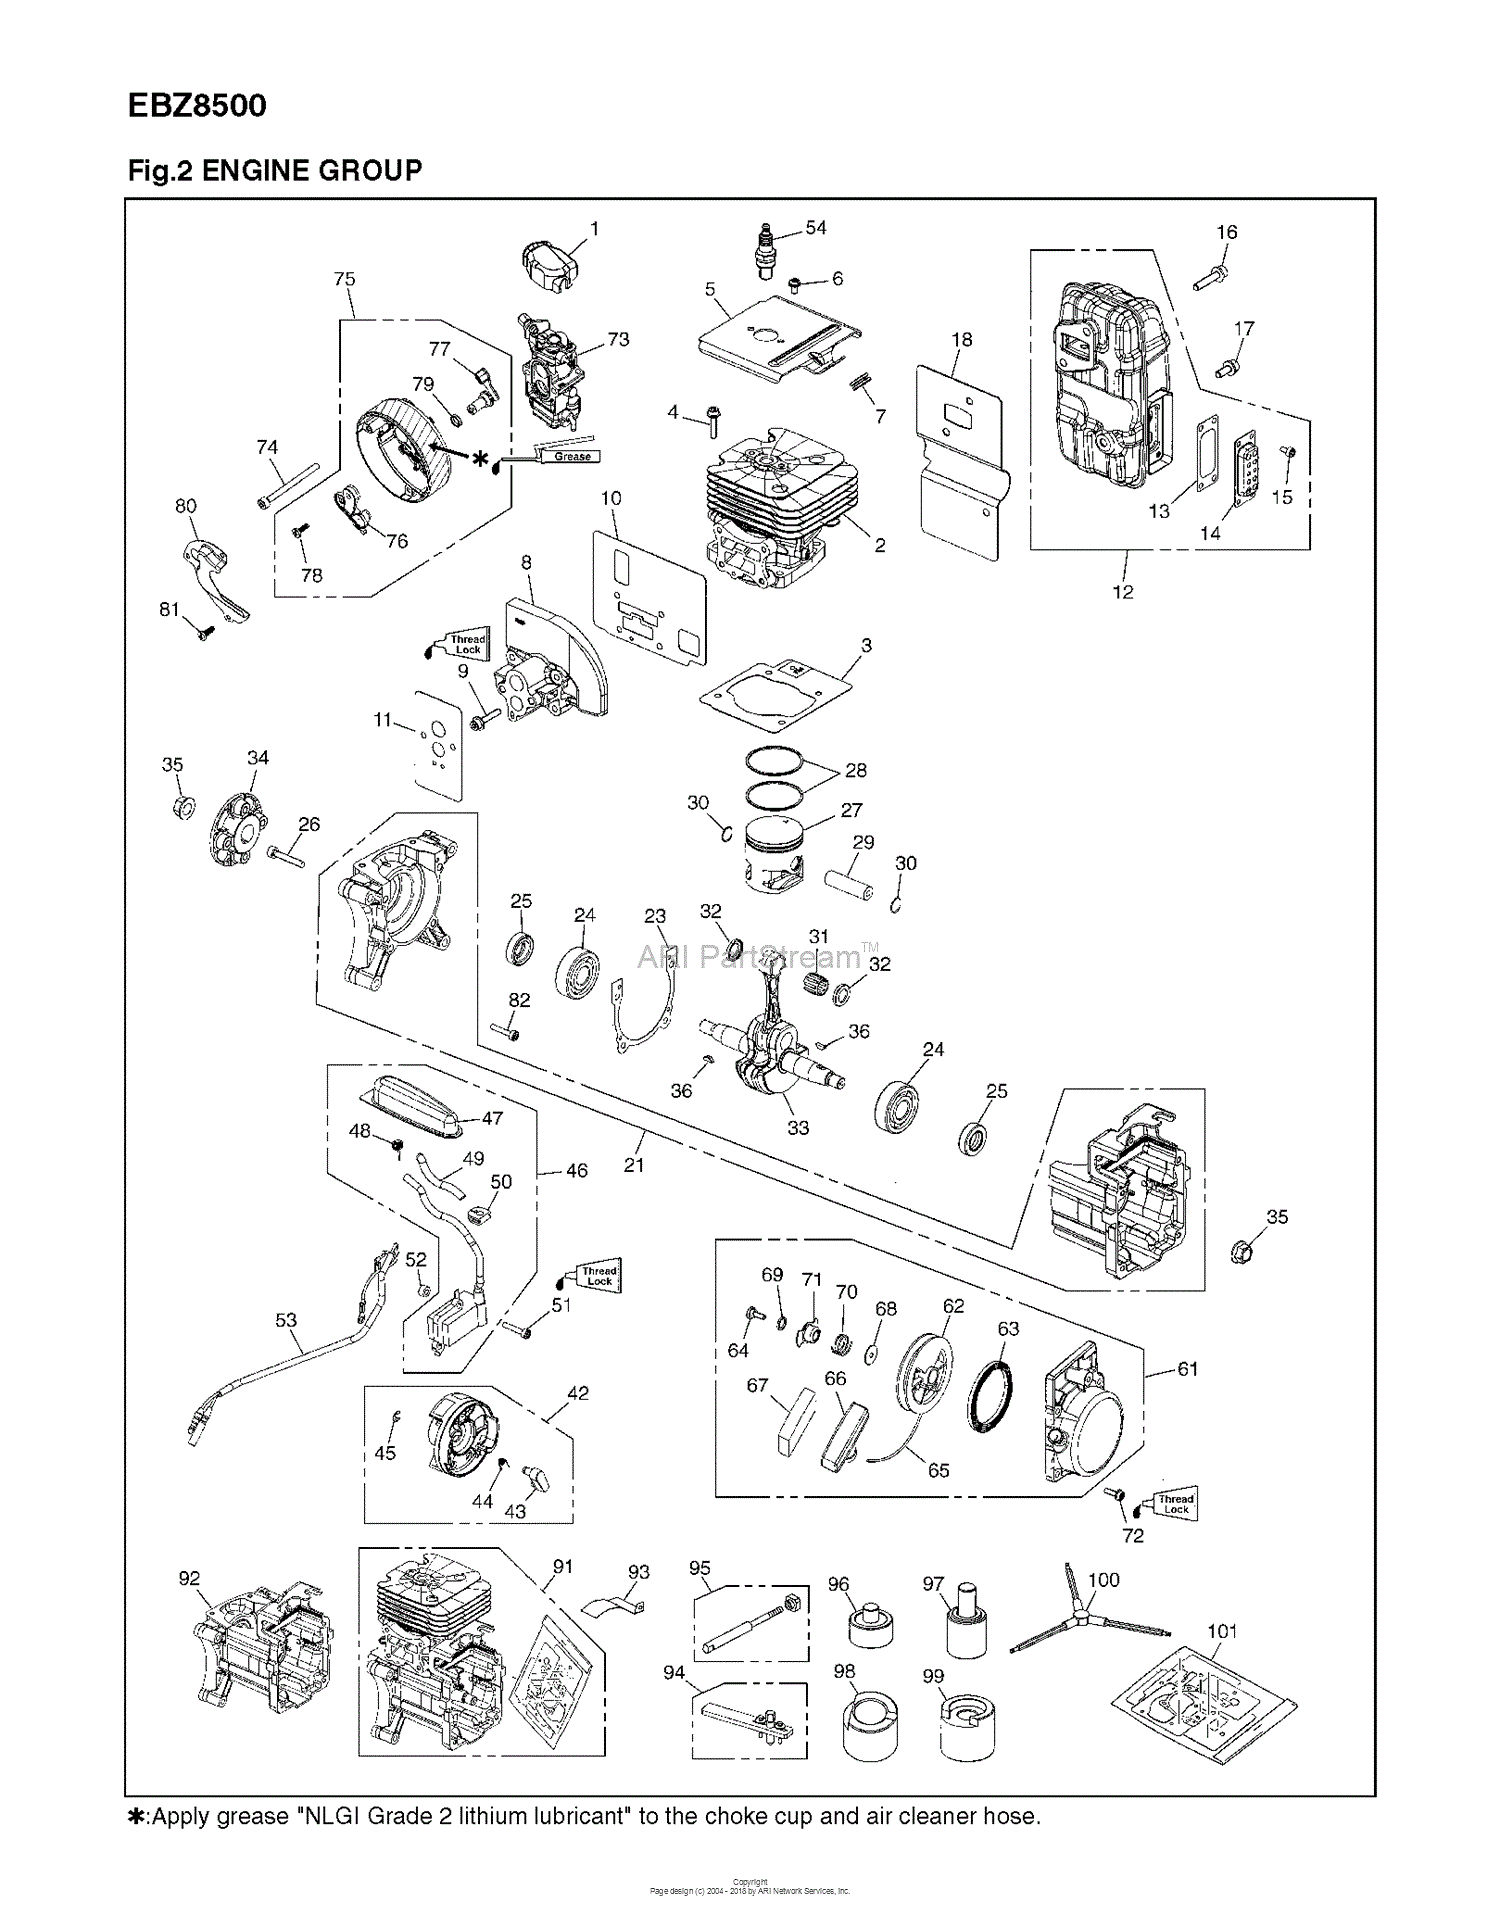 Red Max EBZ8500 - SN10200101 AND UP (2014-04) Parts Diagram for ENGINE